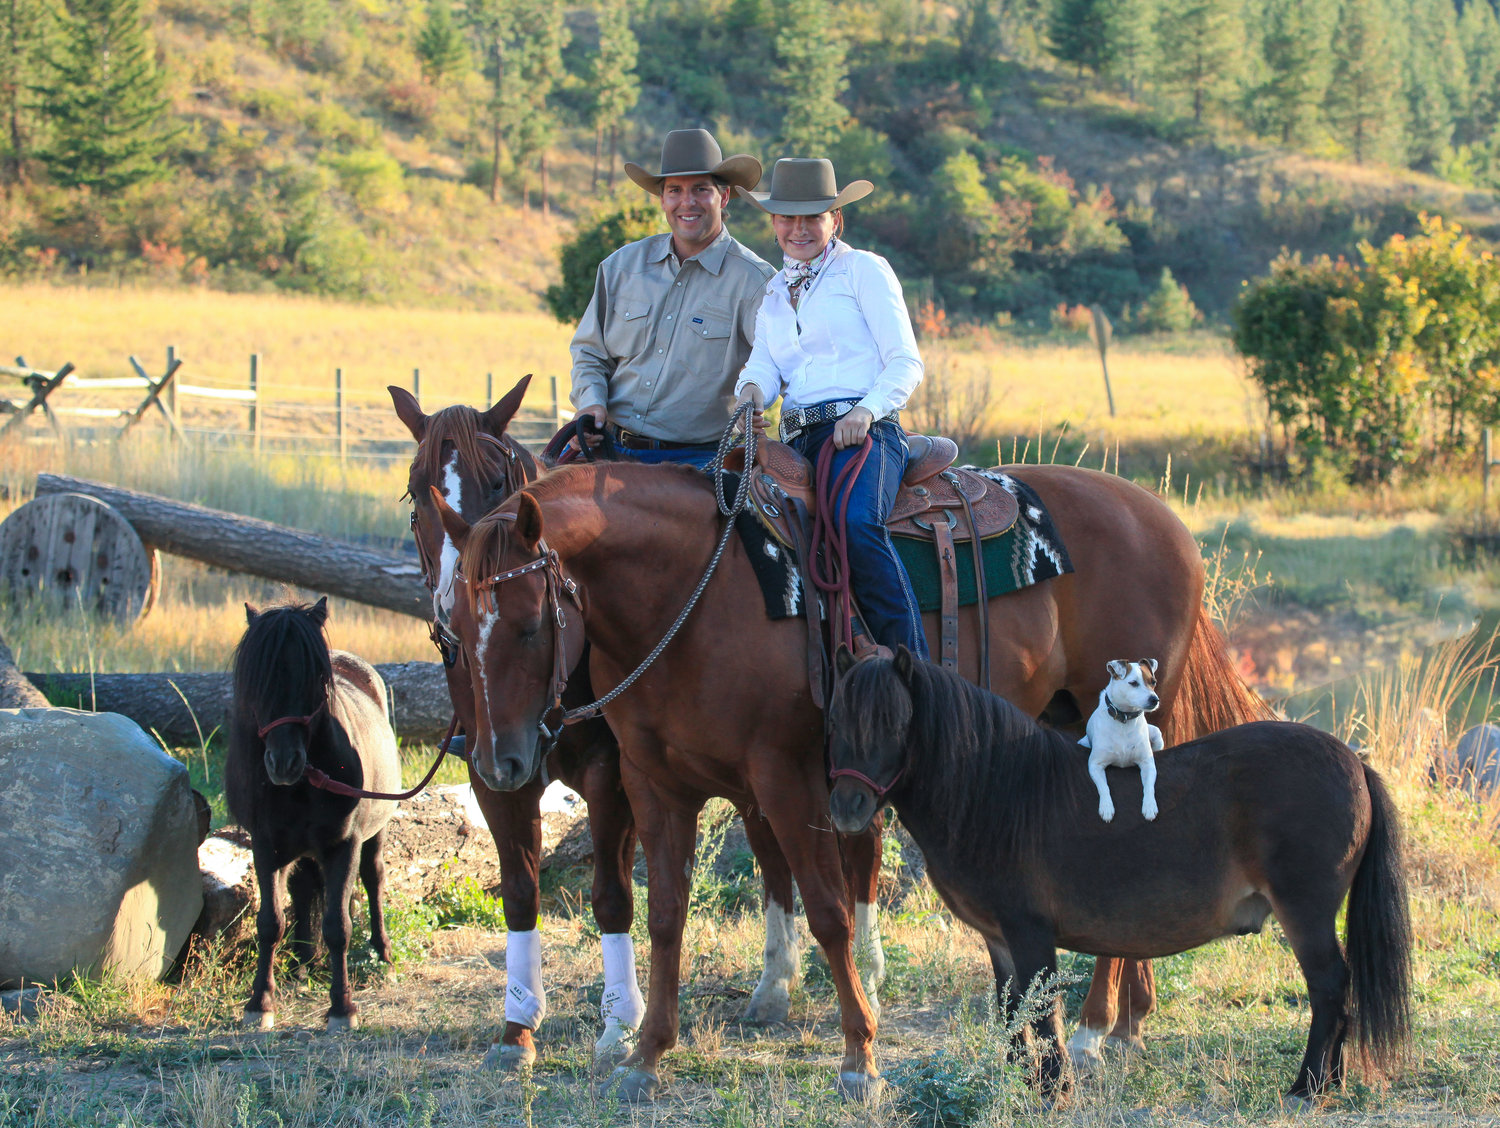 Steve Rother and Francesca Carsen of Rother’s Horsemanship in Eastern Washington sit atop two full-size horses while flanked by mini horses Jet (left) and Spanky (right). Atop Spanky sits Dally, a Jack Russell.